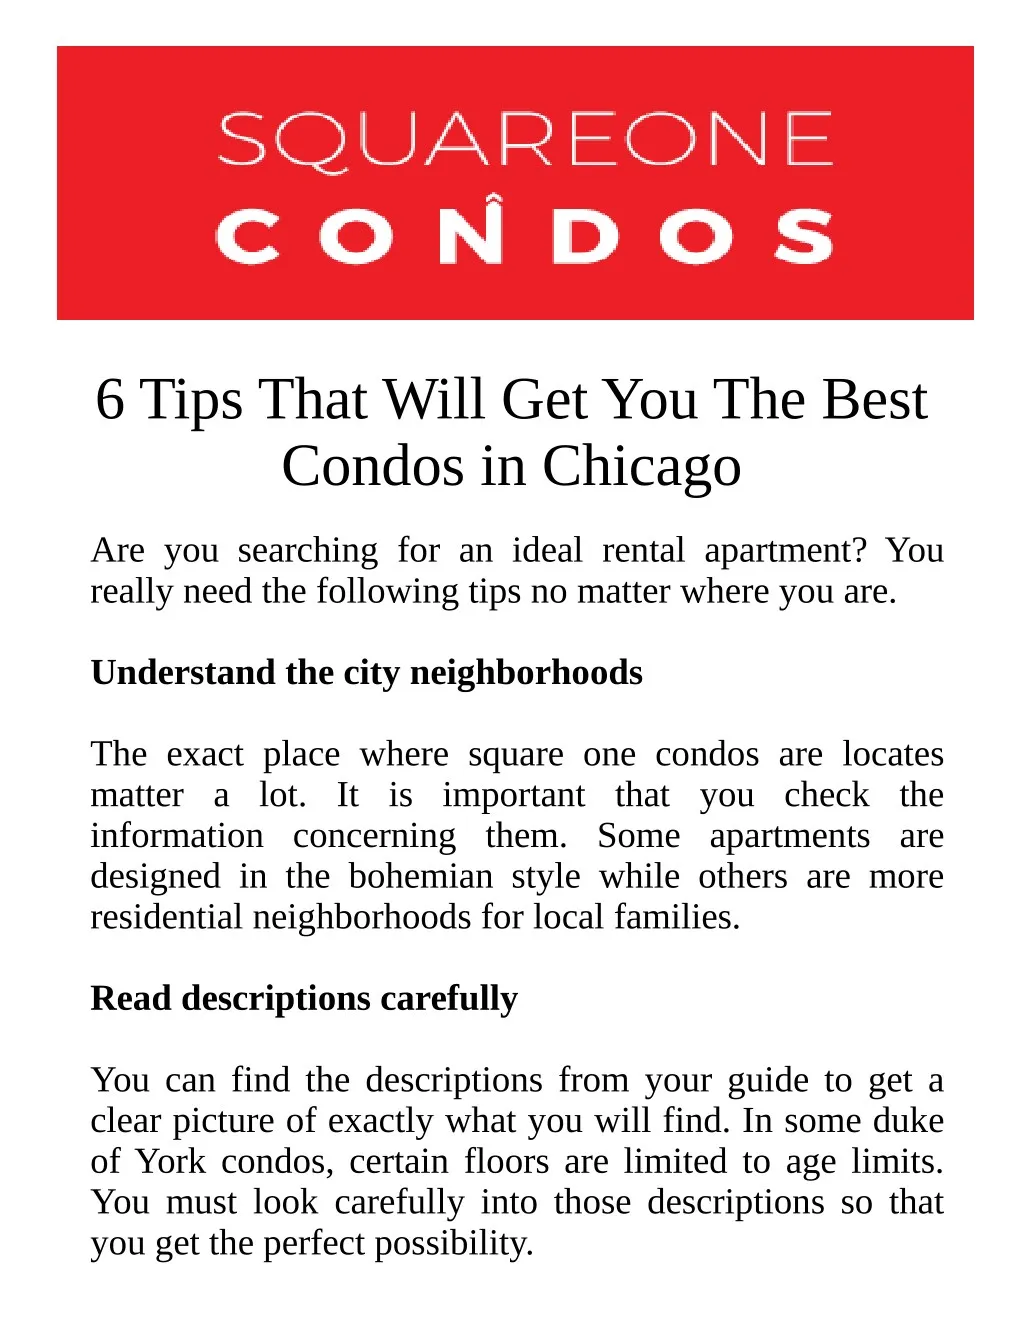 6 tips that will get you the best condos